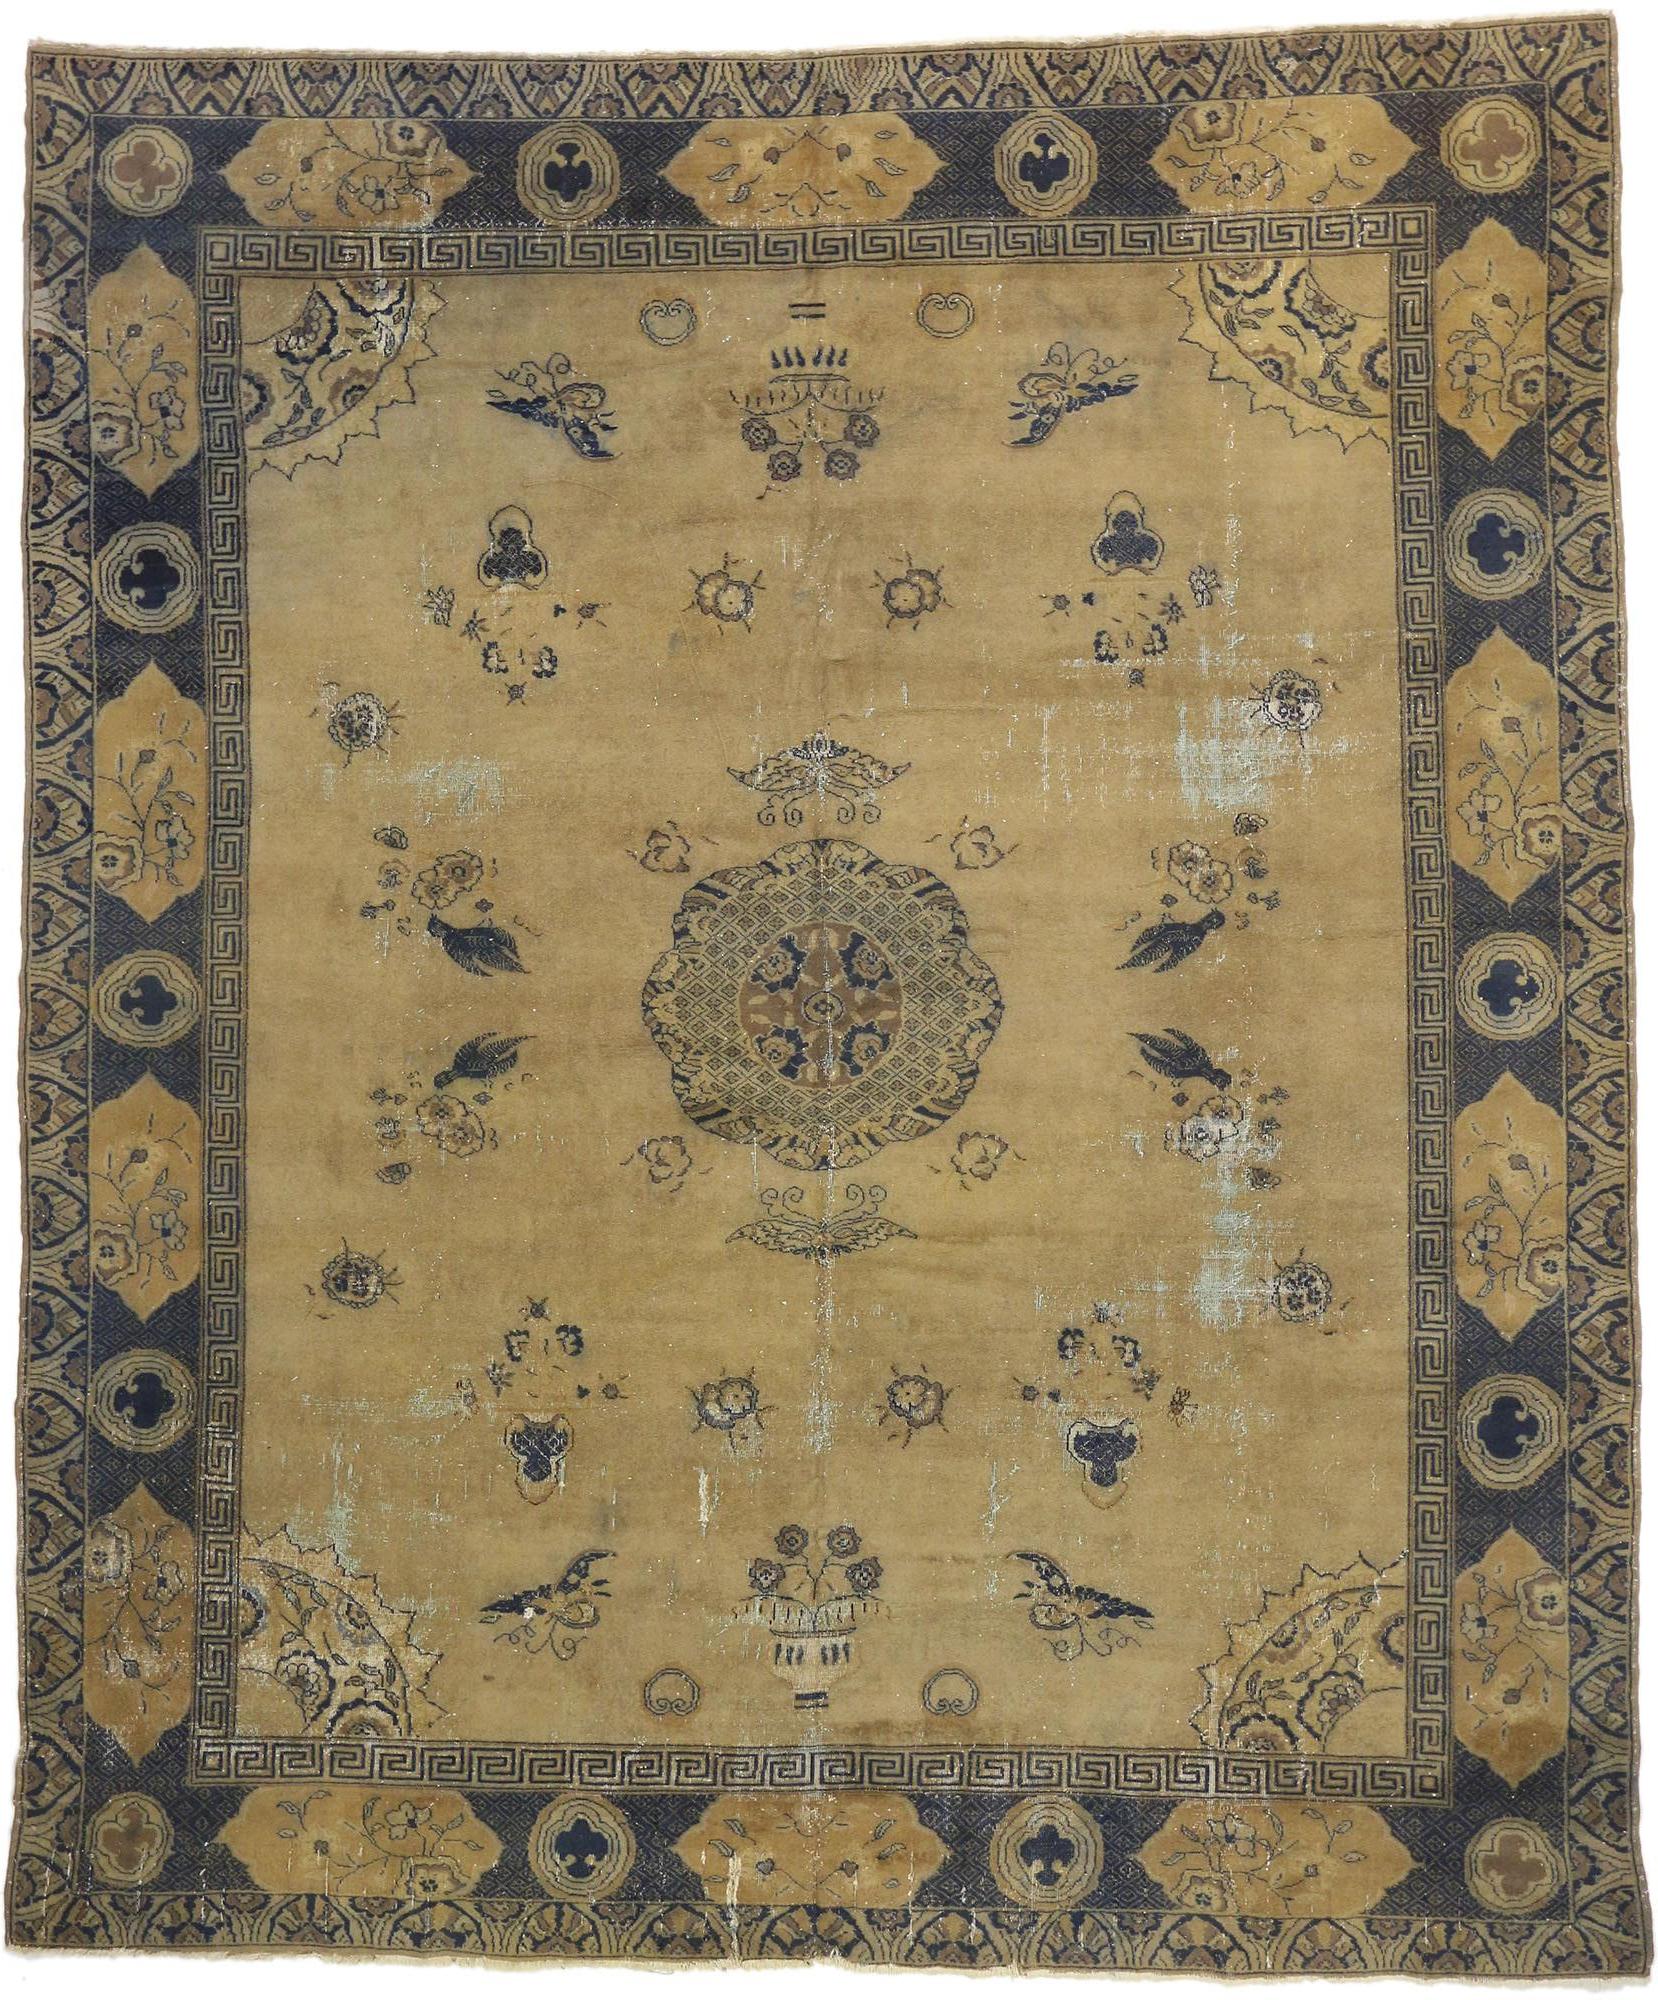 70730 Distressed Antique Turkish Sparta Rug with Chinoiserie Chic Style 12'02 x 14'02. With timeless elegance and nostalgic charm, this hand knotted wool distressed antique Turkish Sparta rug can beautifully blend modern, contemporary and